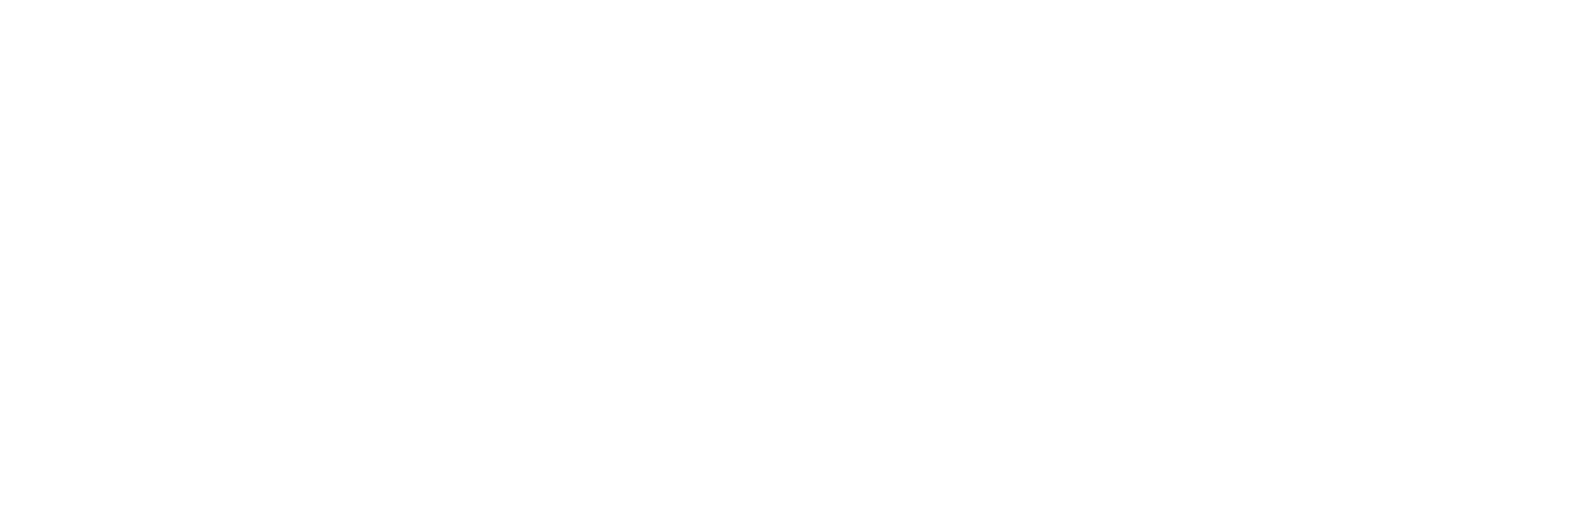 Superior Group of Companies logo large for dark backgrounds (transparent PNG)